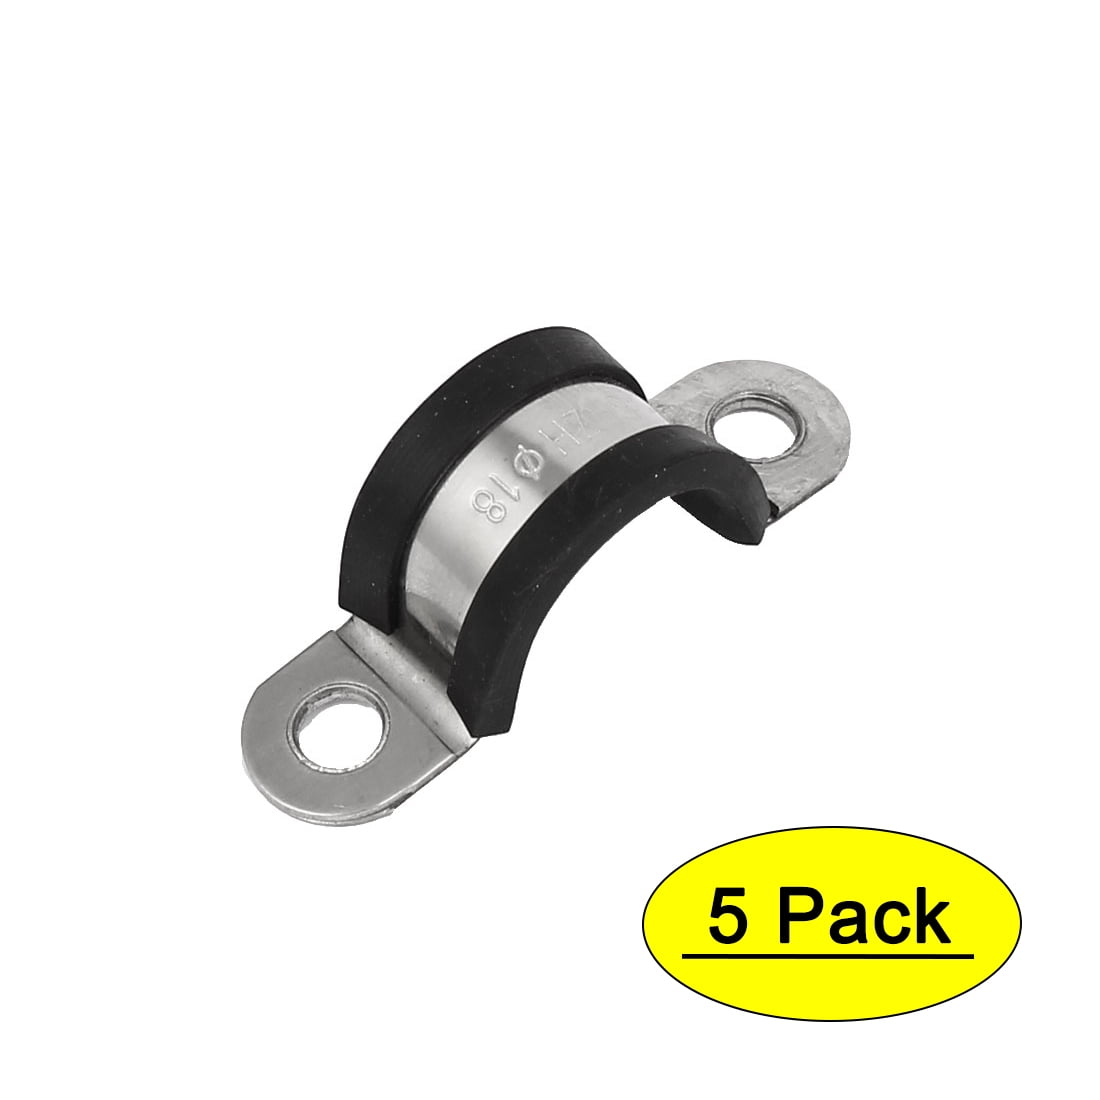 10 Pieces 8mm U-Pipe Clips with Rubber Cushioned Cable Clamp Rubber Lined U Clips EPDM Rubber Lined Mounting Brackets U Shaped Pipe Tube Wire Clamps Clips for Tube Or Wire Cord Installation 